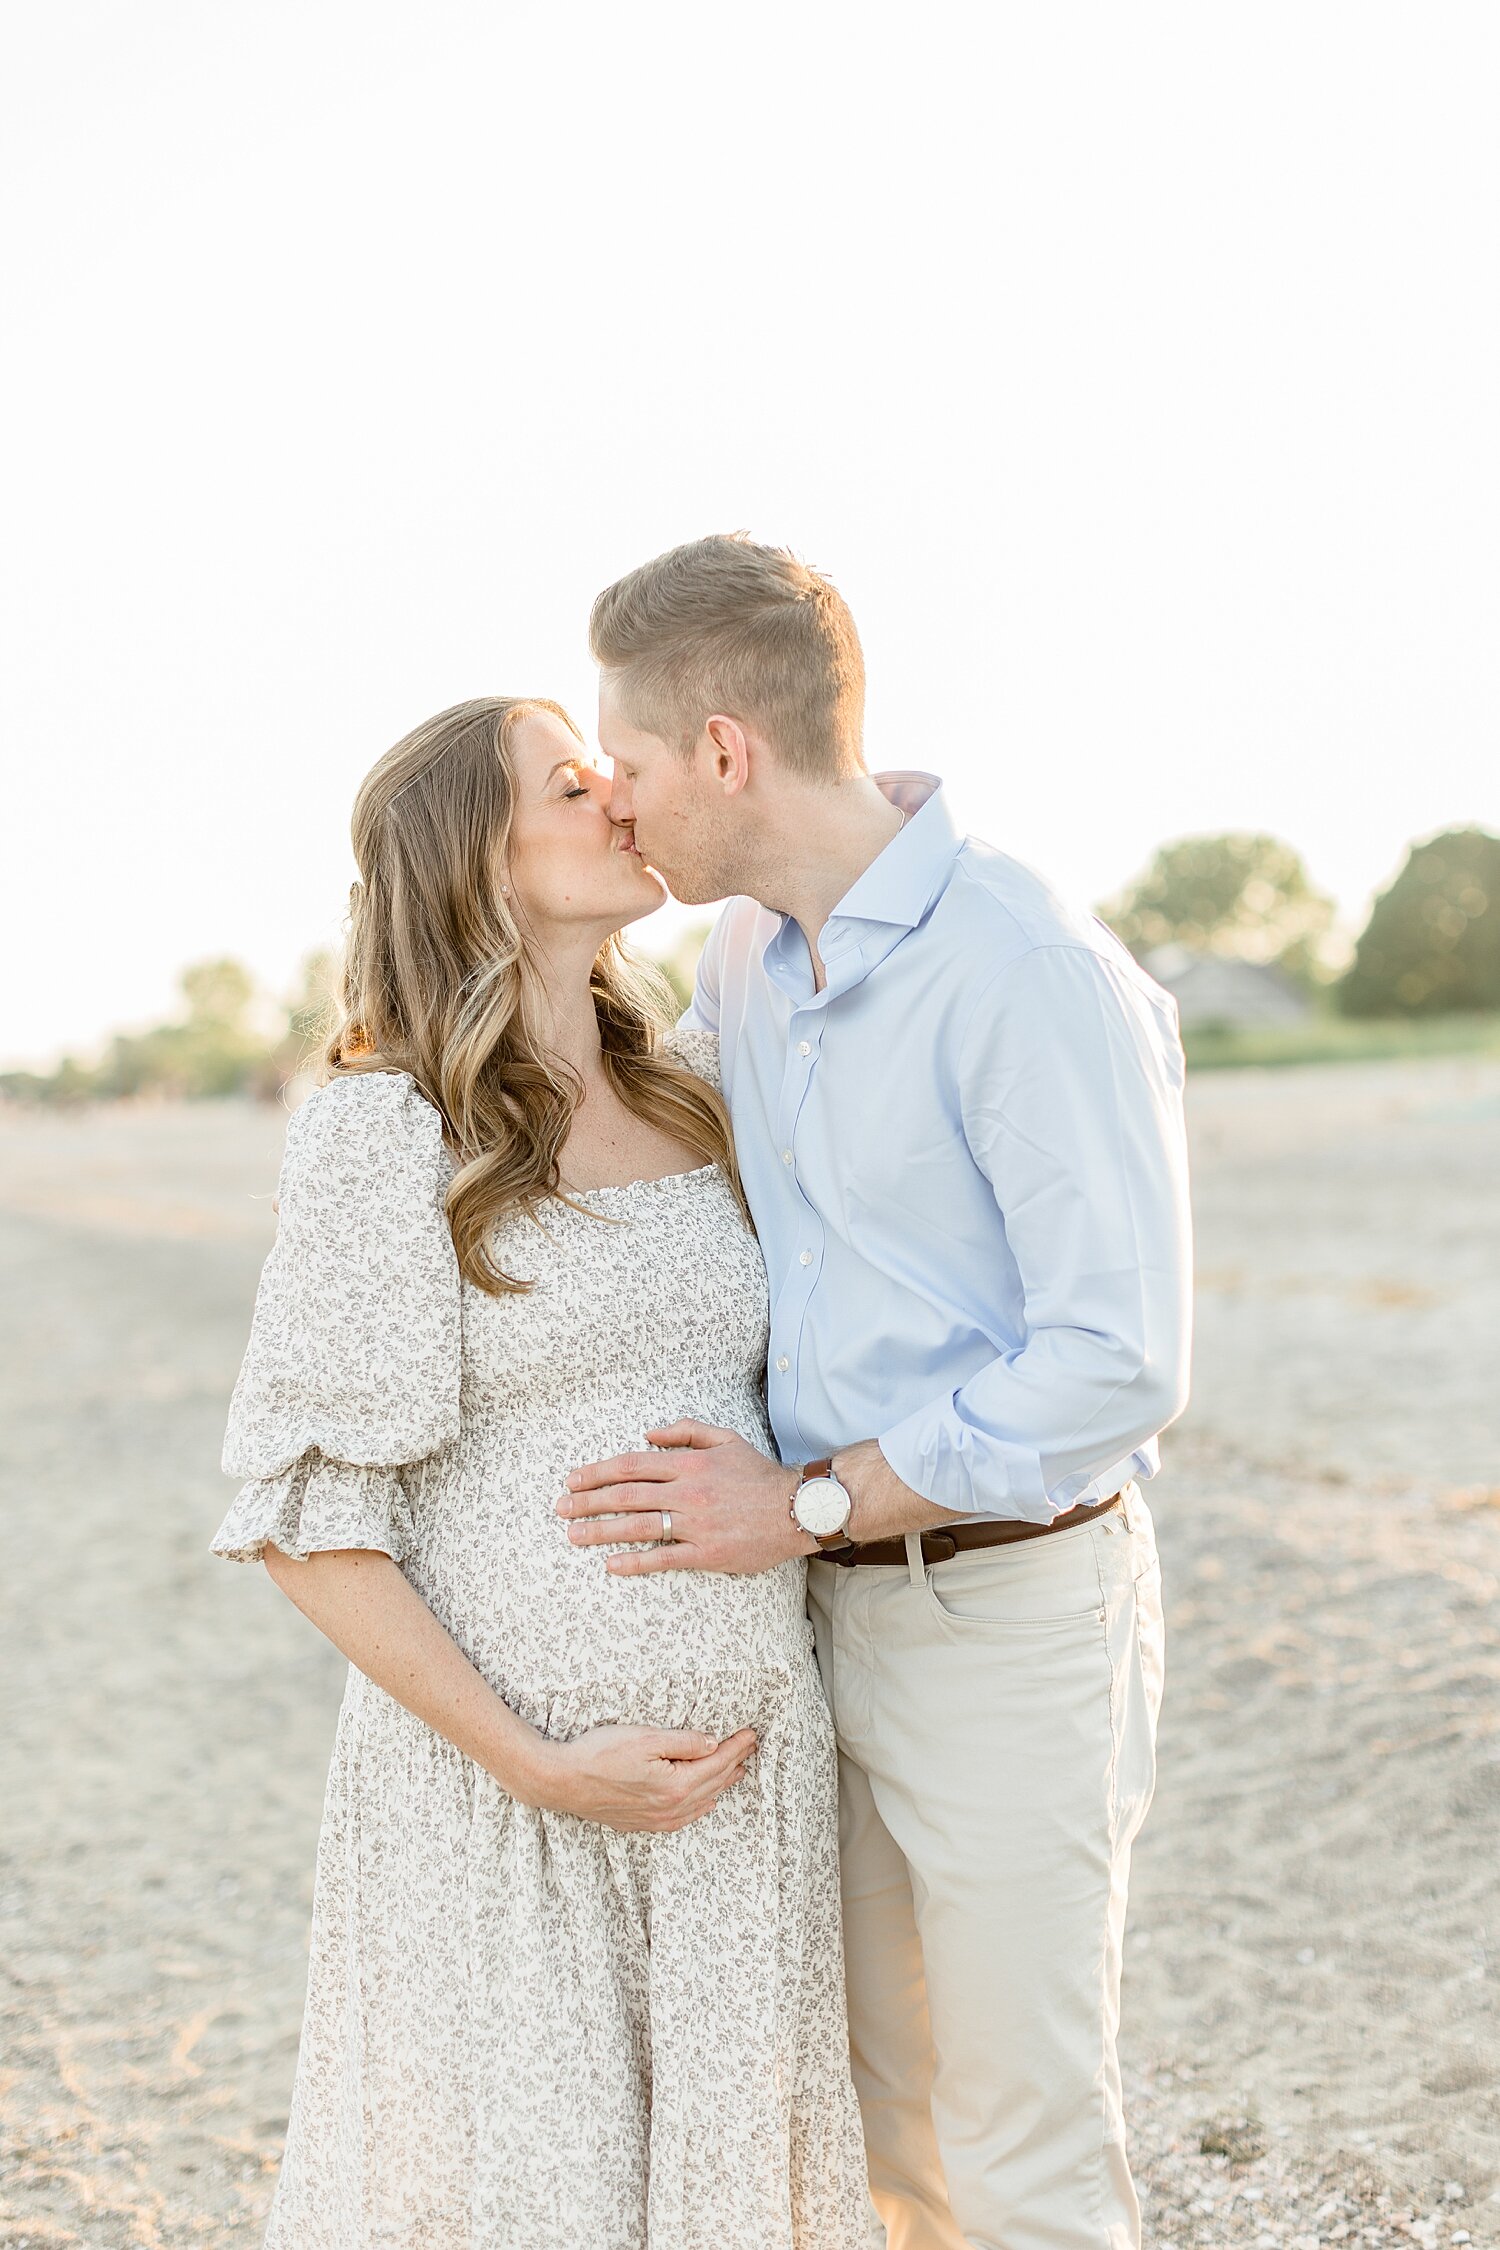 Sunset beach maternity session at Sherwood Island State Park in CT | Kristin Wood Photography